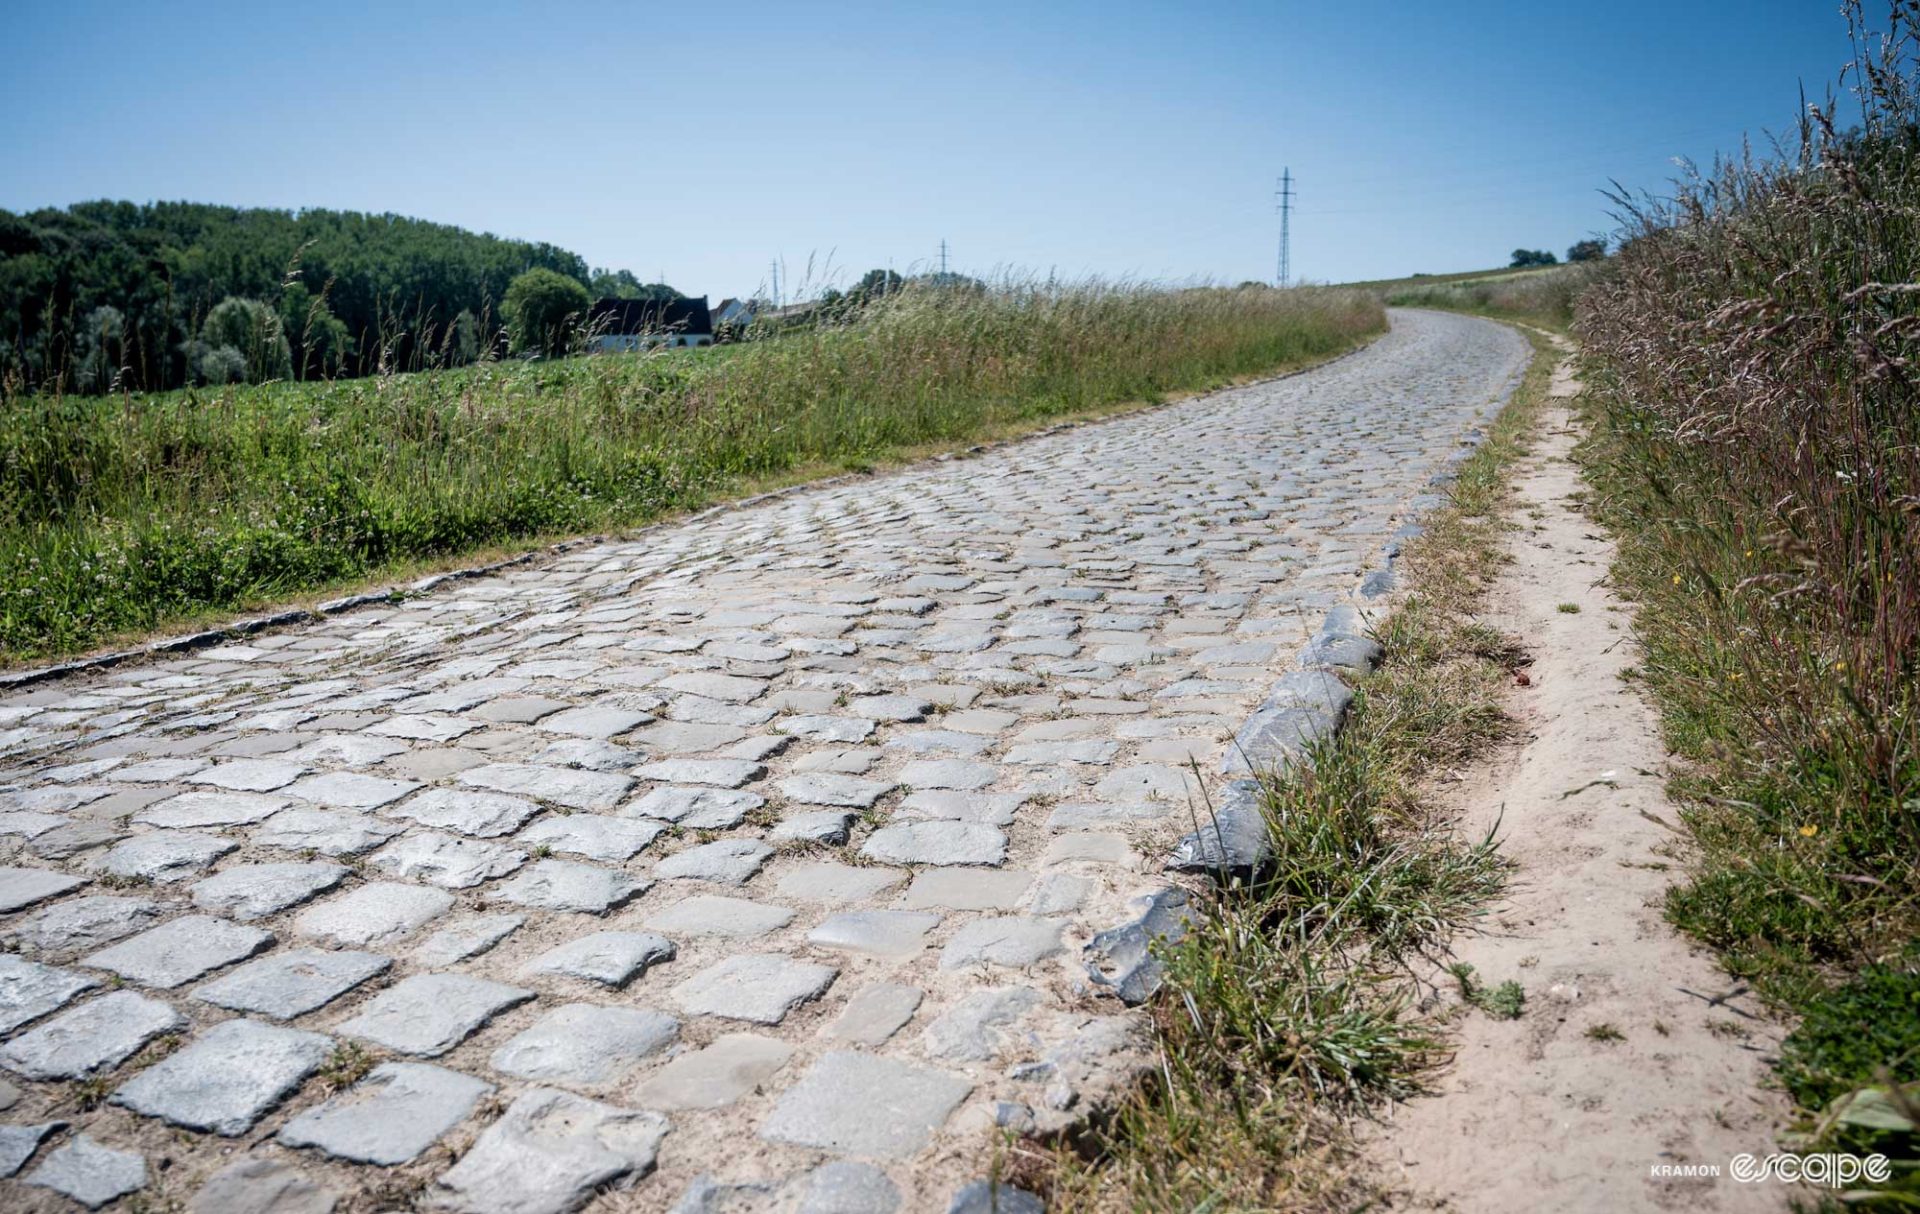 A blue granite cobbled lane rises through a field in the Flemish Ardennes. No one is in sight and it curves around a corner out of view.